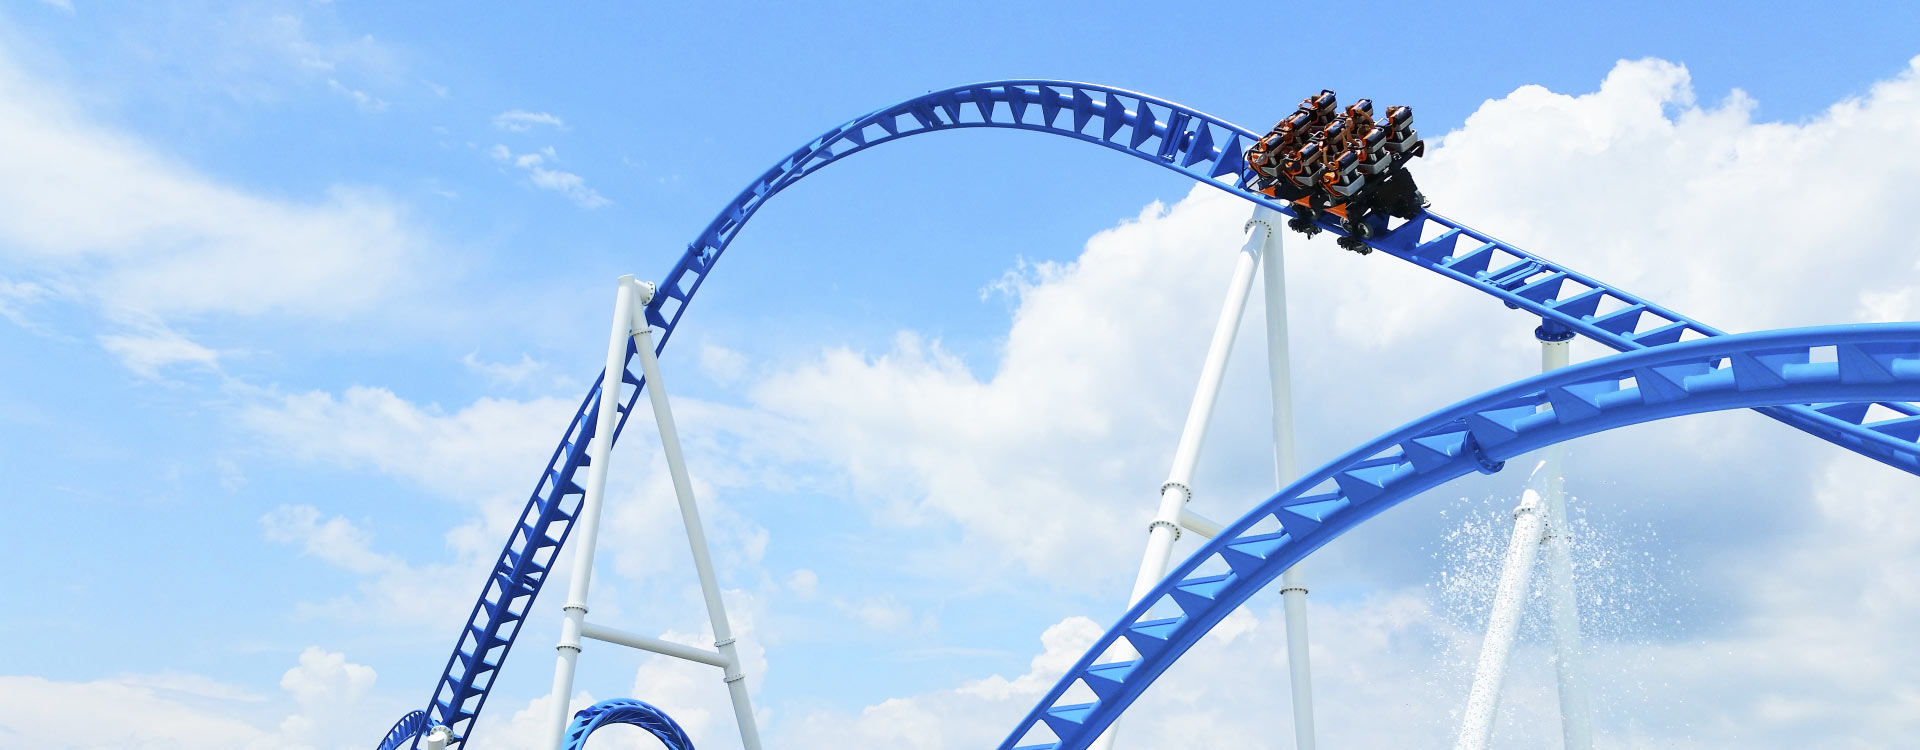 ROLLER COASTERS heading image